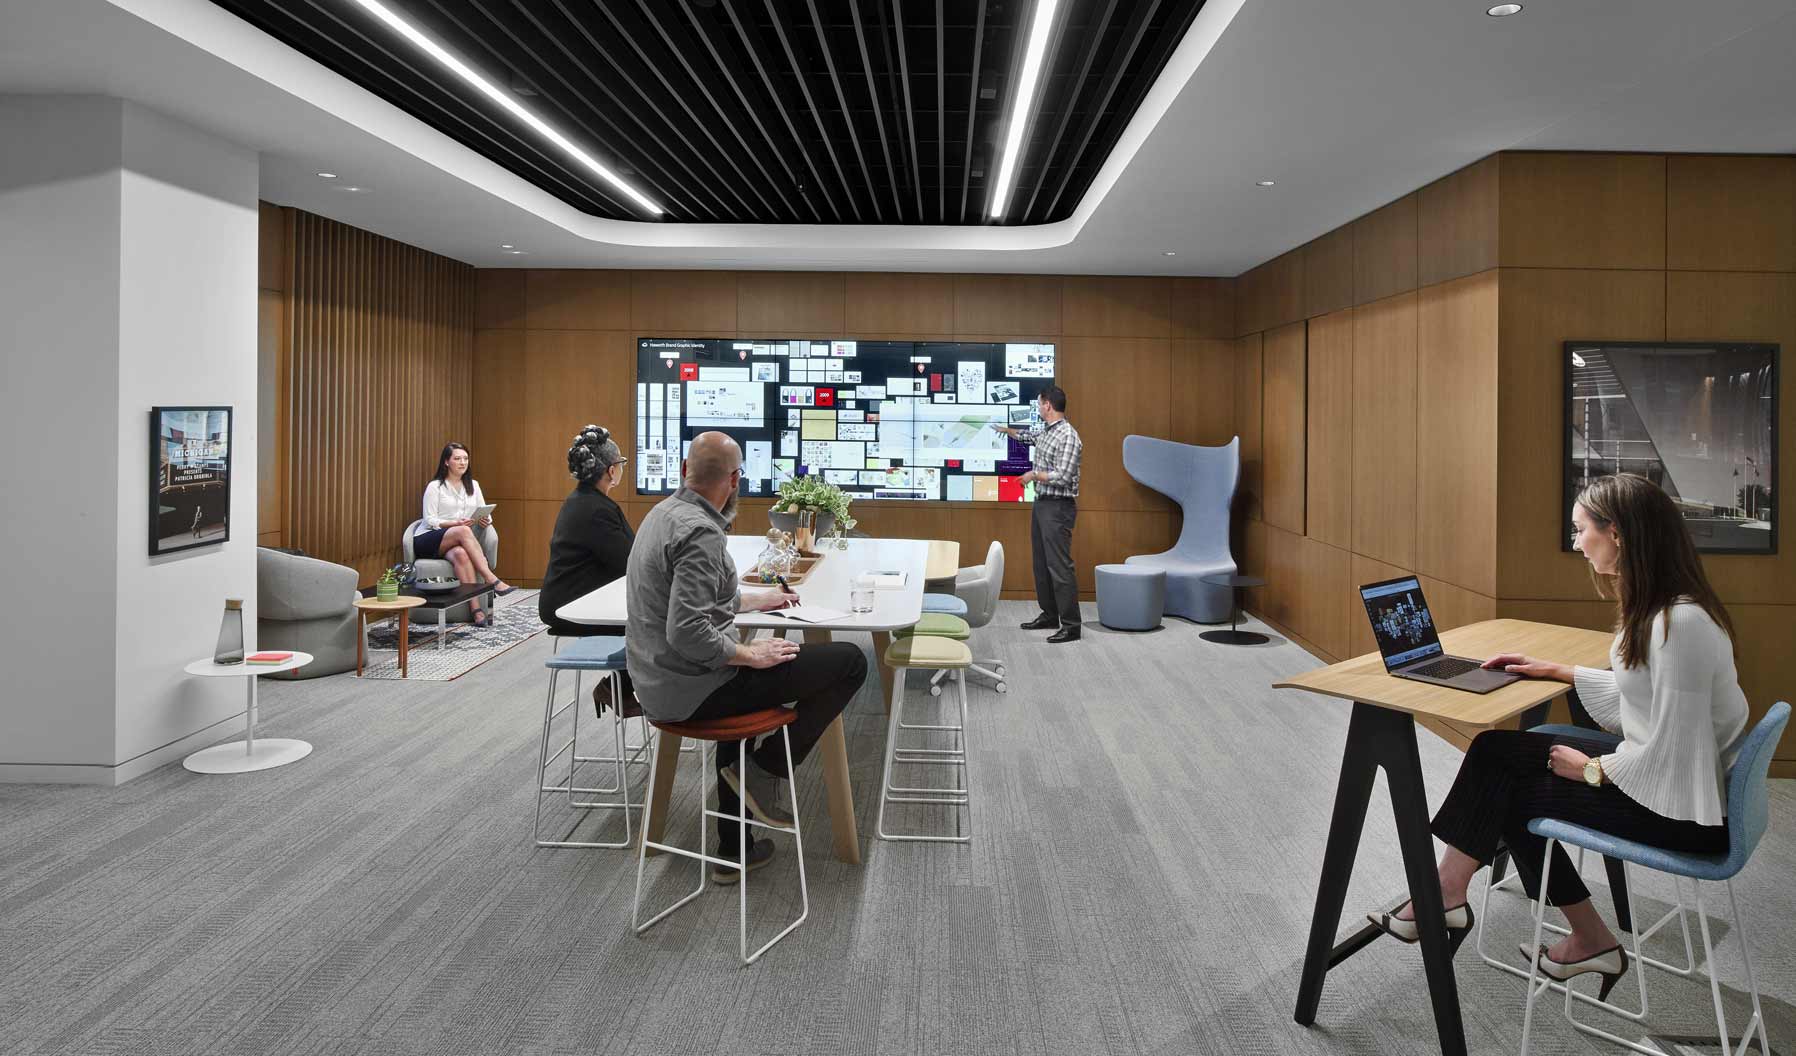 This project space is all about active collaboration and ideation. It supports a range of uses, from a traditional meeting to longer ownership by a particular team. The various furniture postures encourage users to move throughout the space and collaborate and engage with the large Bluescape screen.